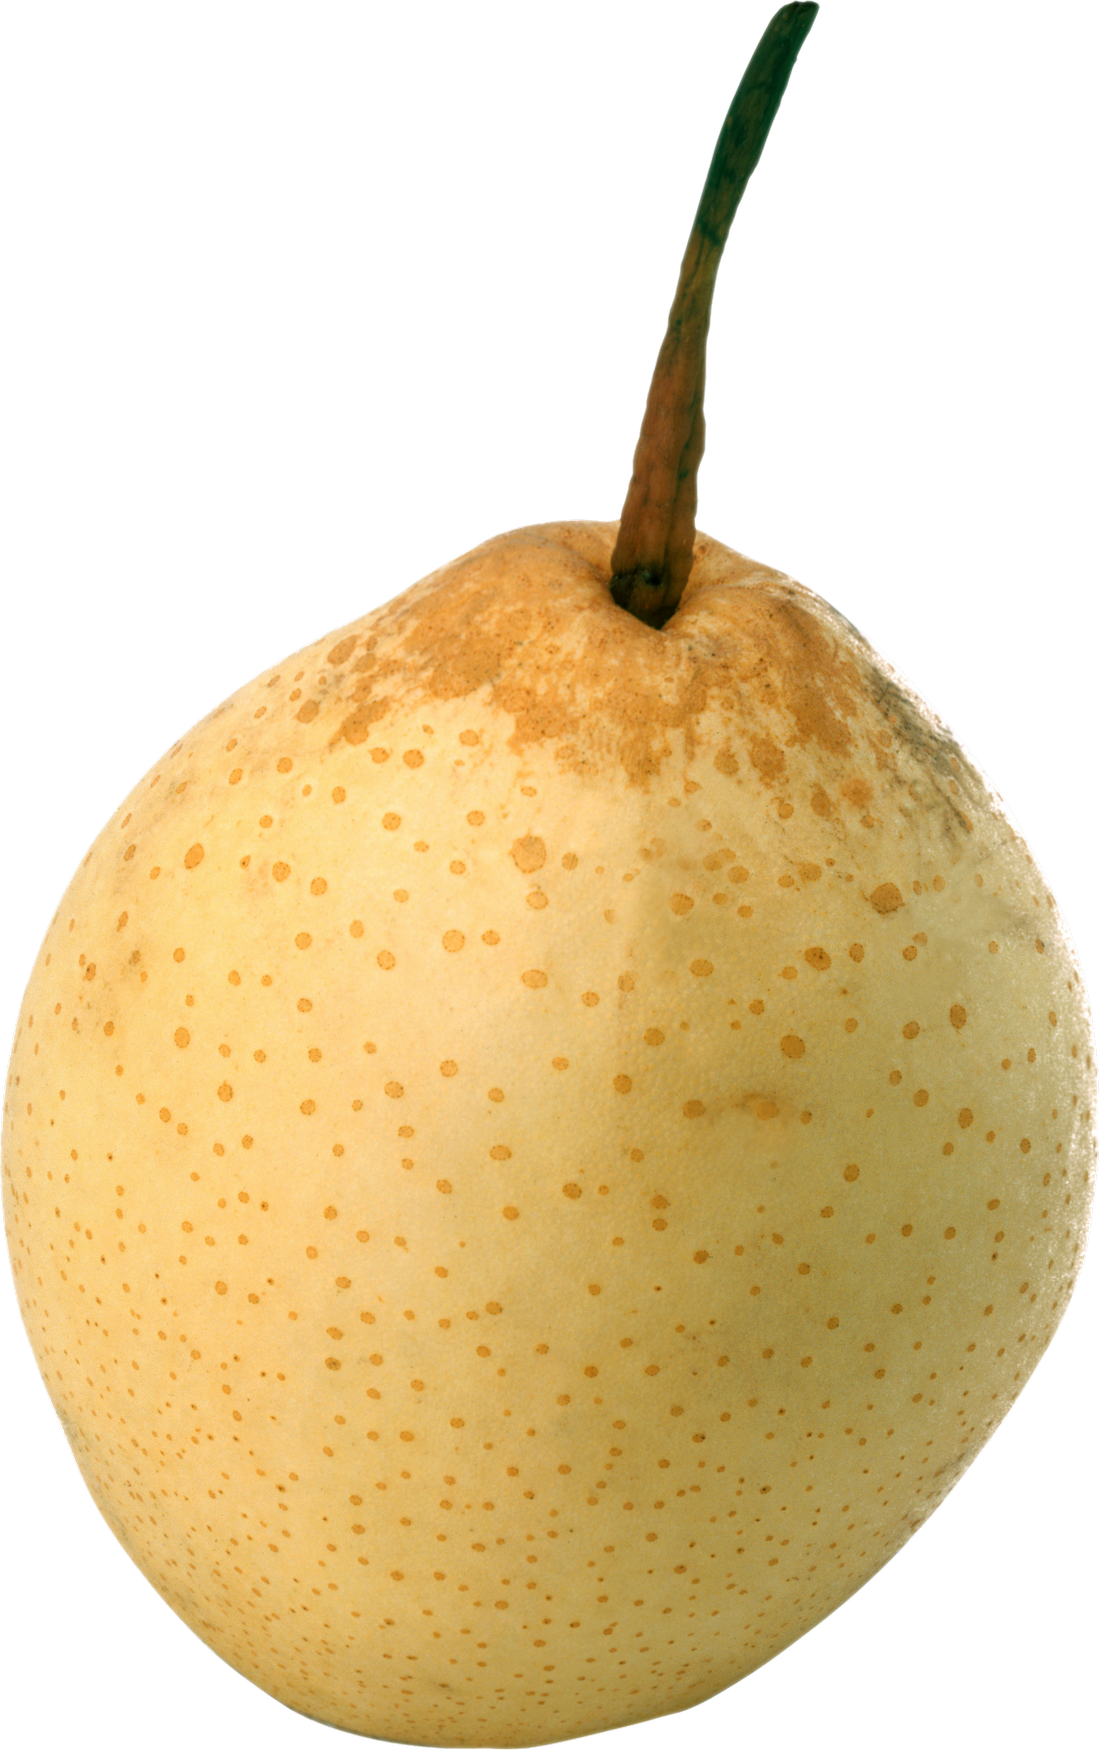 Pear Asian Free Download Image PNG Image